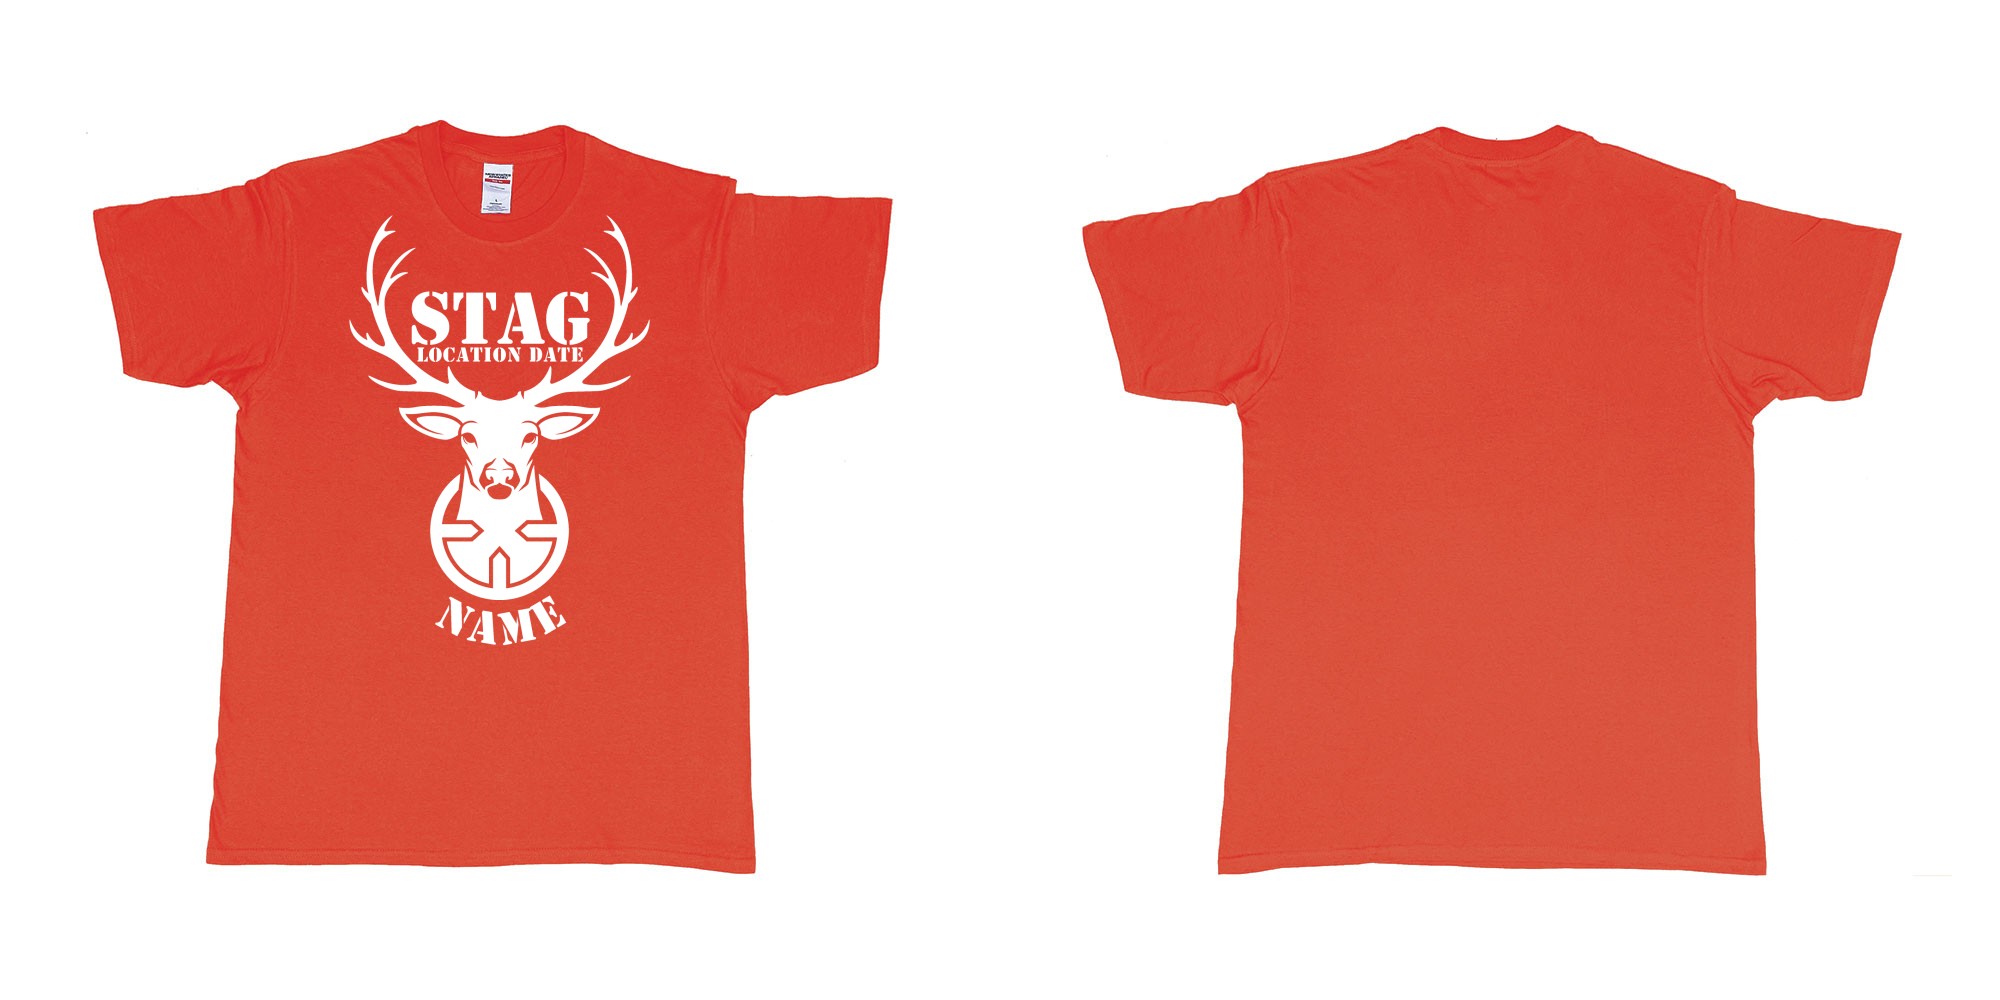 Custom tshirt design aiming for a stag custom tshirt print in fabric color red choice your own text made in Bali by The Pirate Way